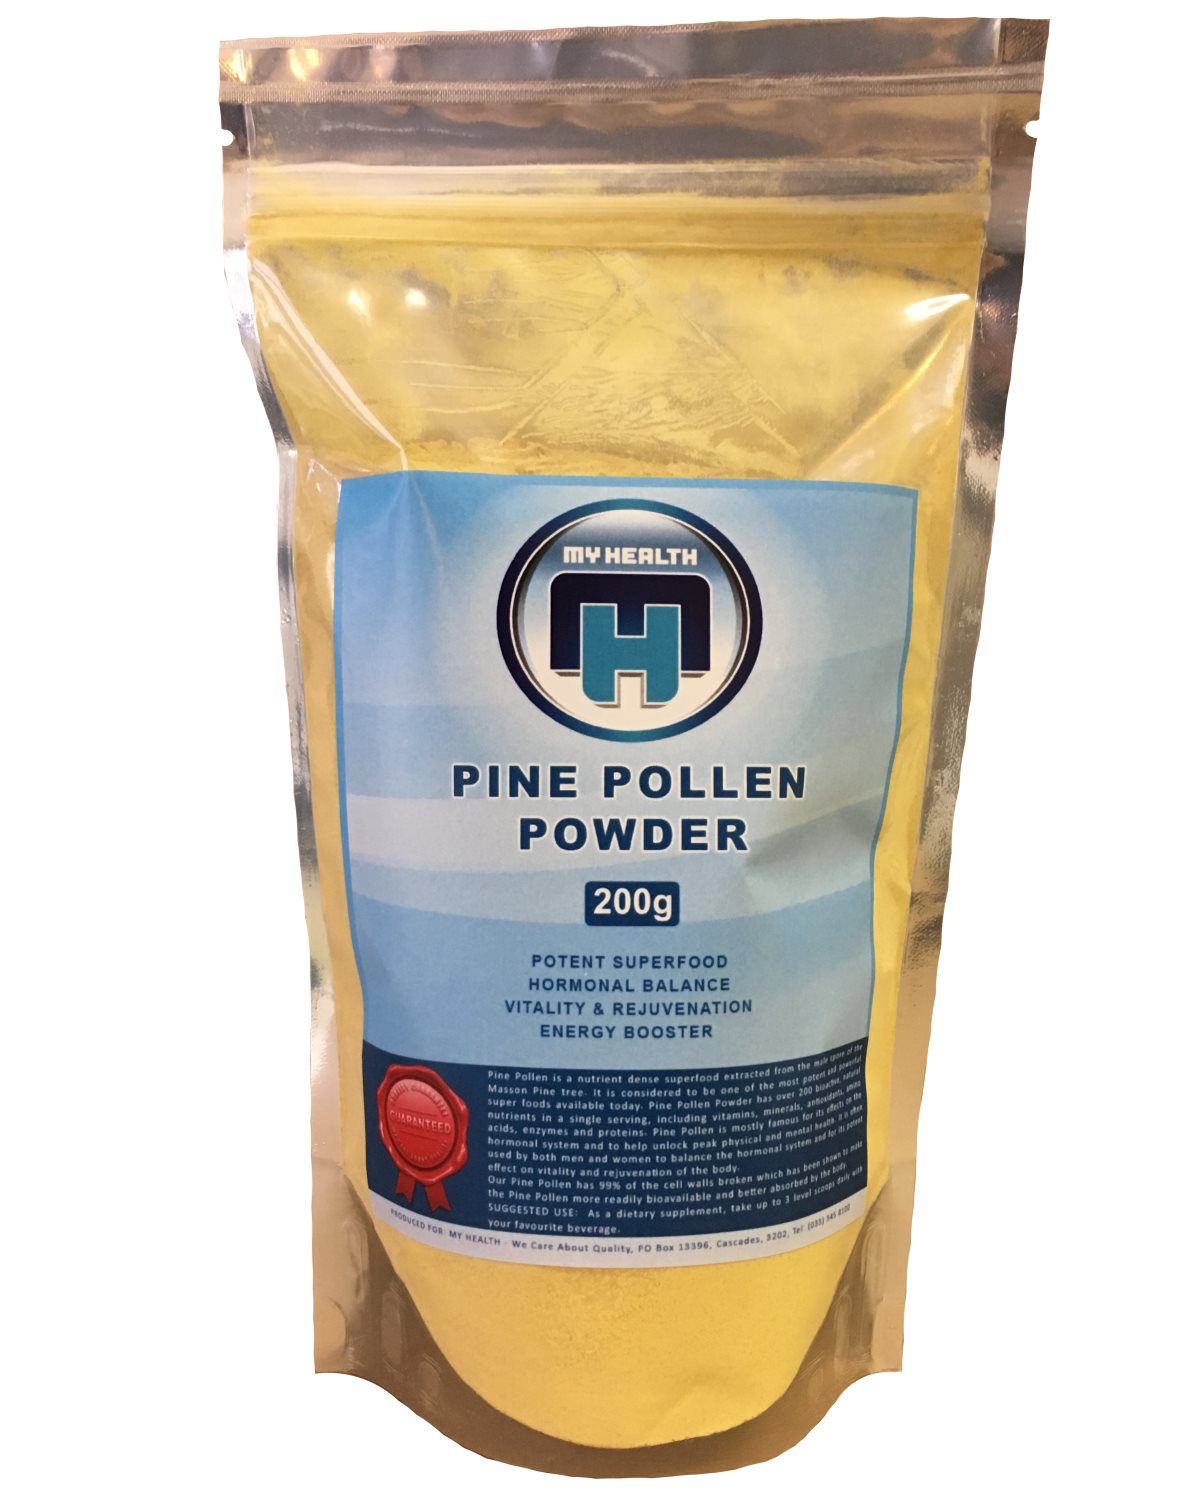 Quality Pine Pollen Powder in South Africa from My Health Online.